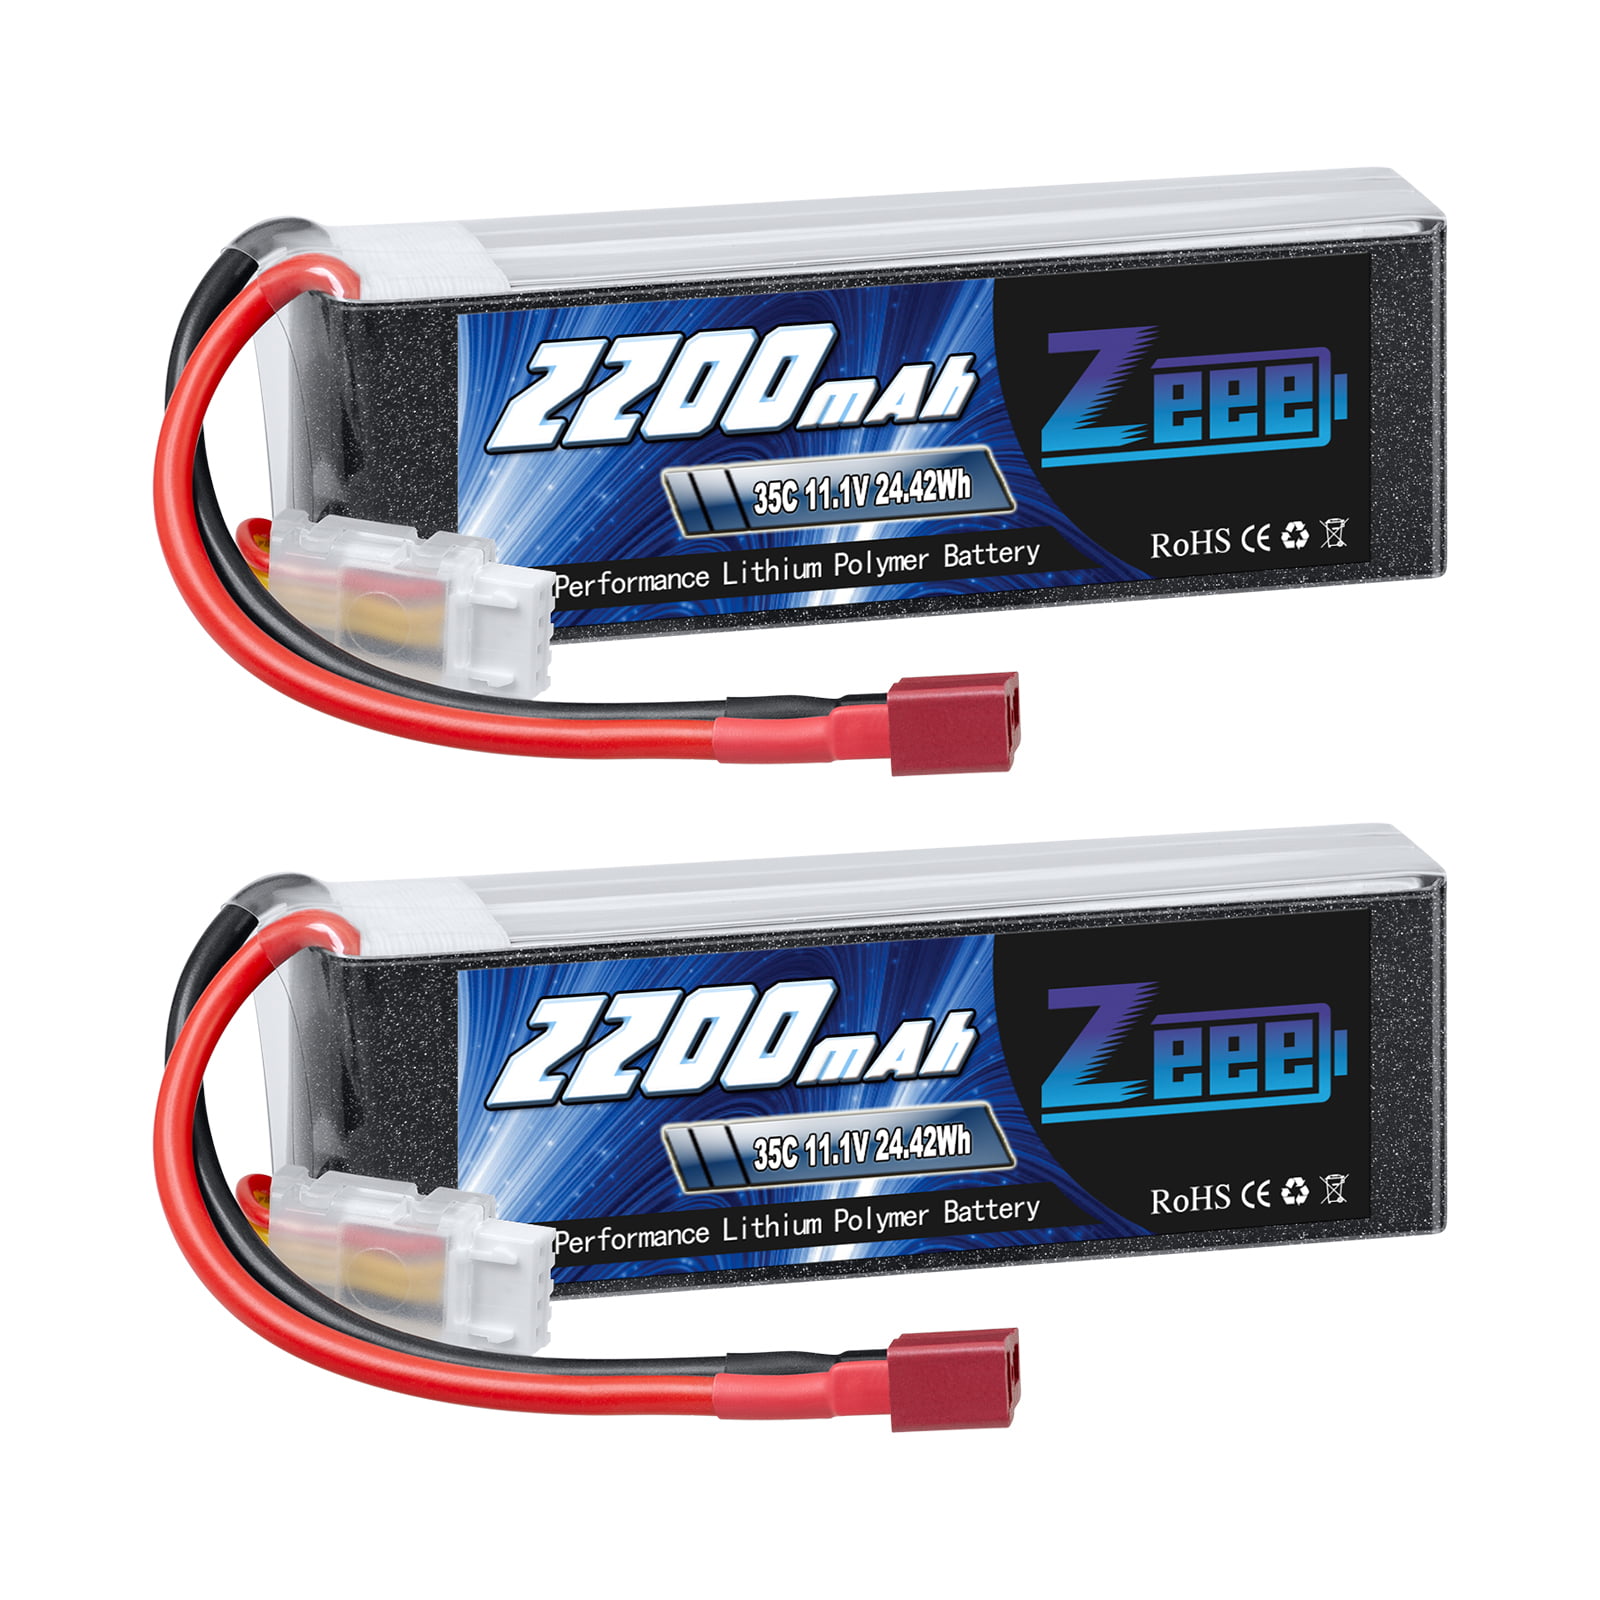 2 Pack Zeee 2S 1500mAh Lipo Battery 7.4V 60C Soft Case RC Battery with Deans T Plug for FPV Drone Quadcopter Helicopter Airplane RC Boat Car RC Models 